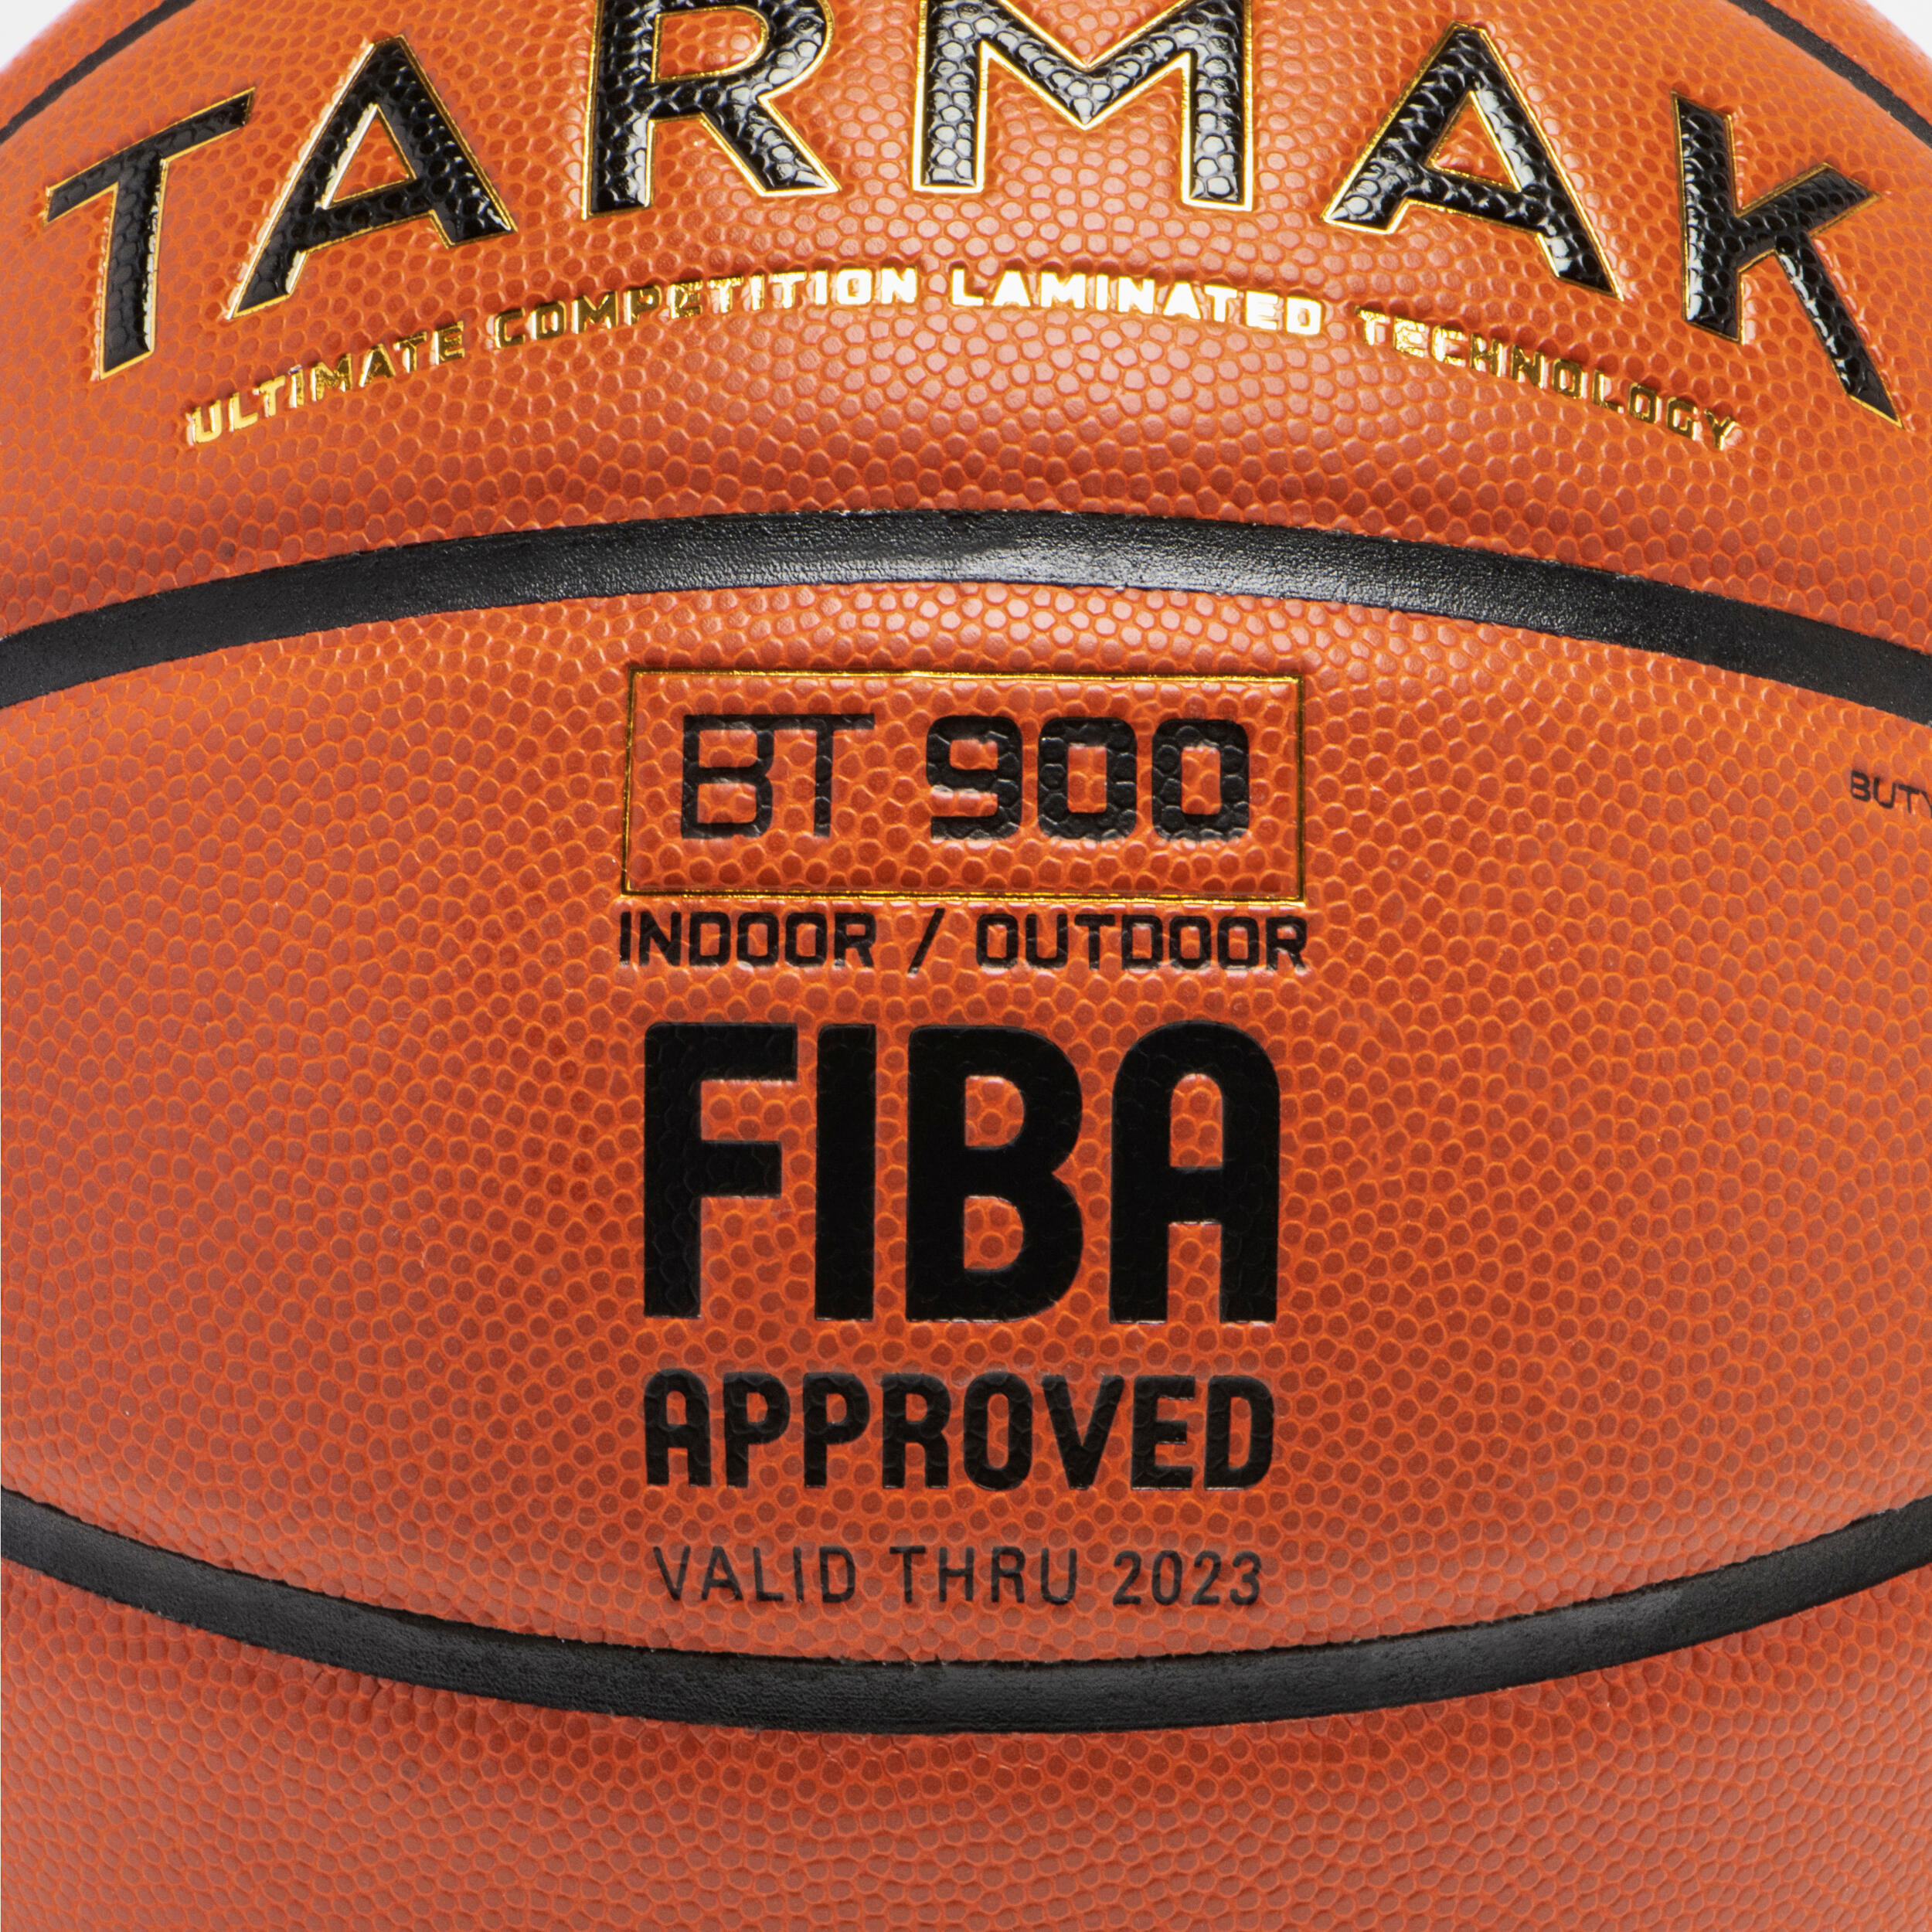 Basketball BT900 - Size 7FIBA-approved for boys and adults 6/6